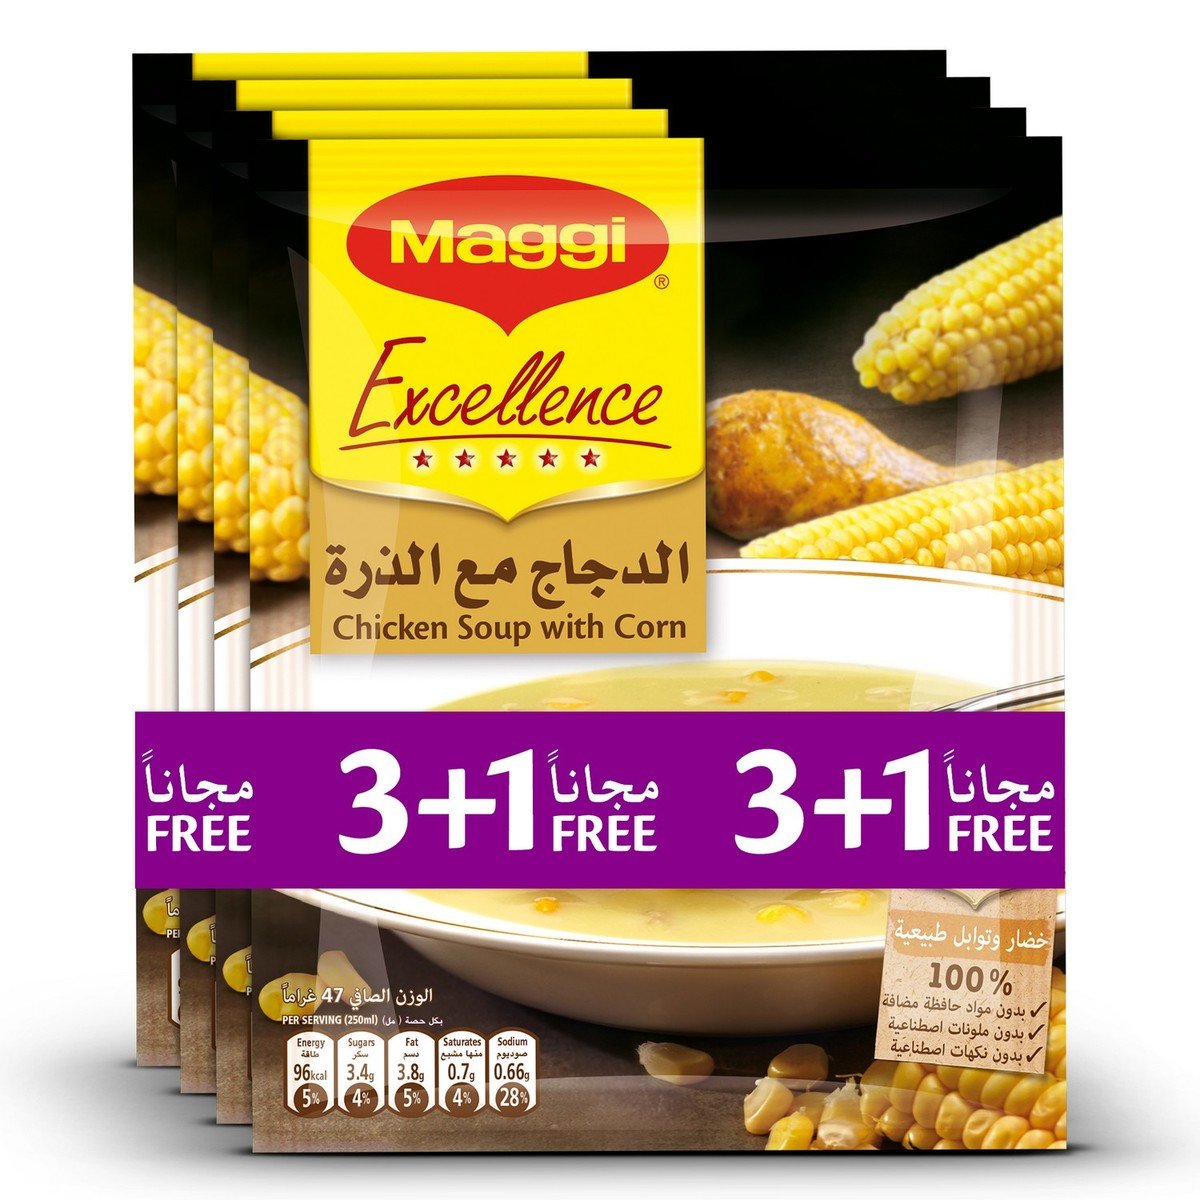 Maggi Excellence Chicken with Corn Soup 4 x 47 g